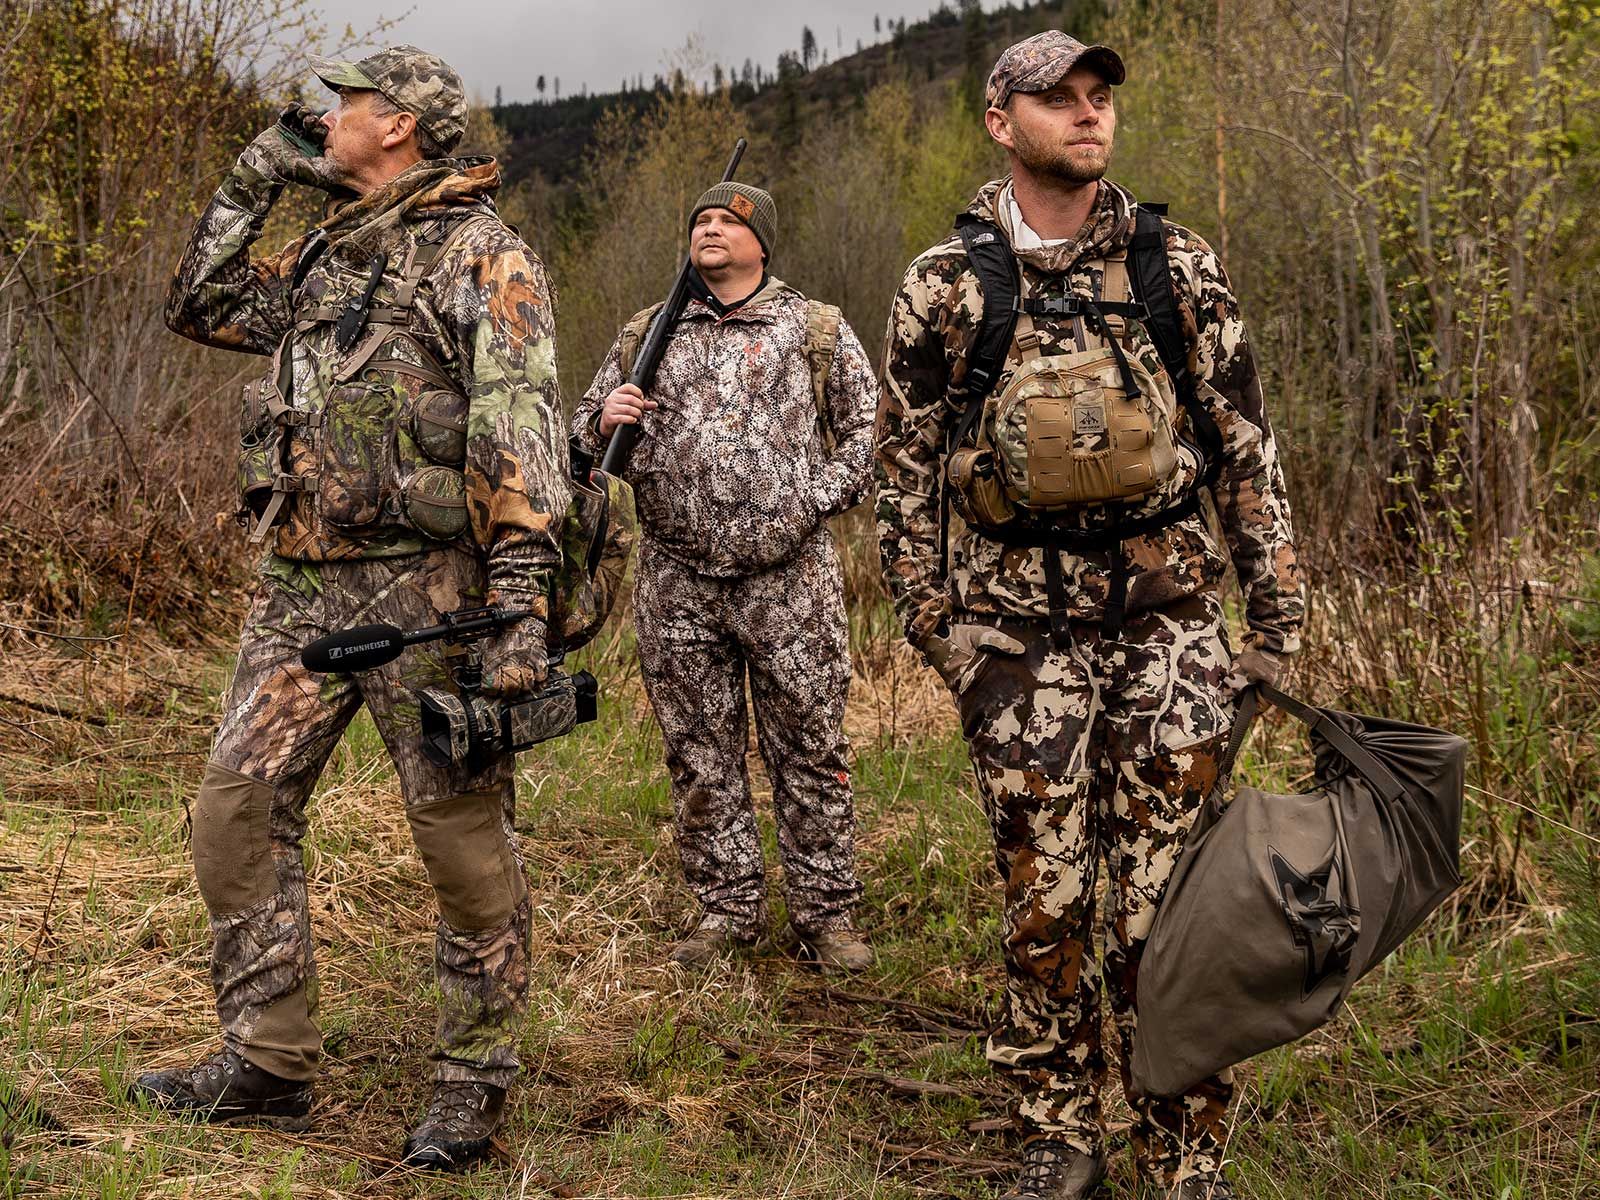 A troubling future for hunting, fishing and outdoor sports